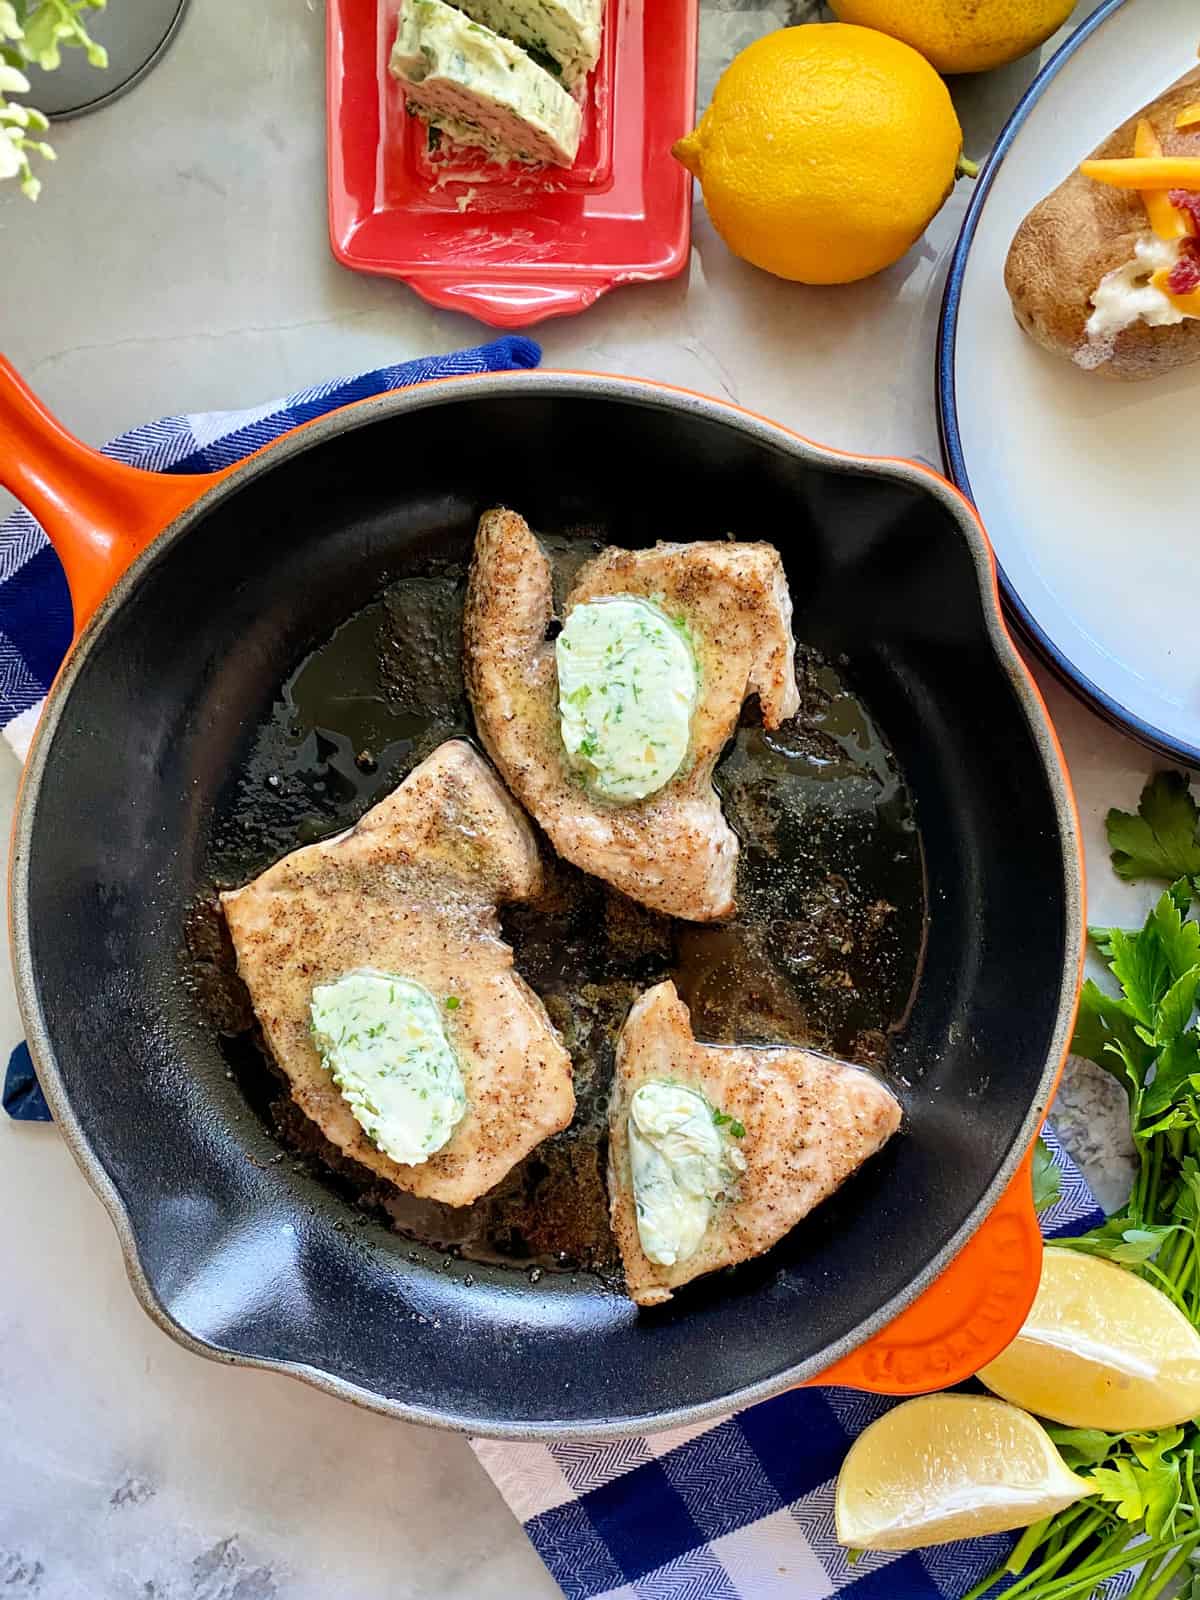 Top view of an orange cast iron skillet filled with three Swordfish Steaks topped with herb butter.